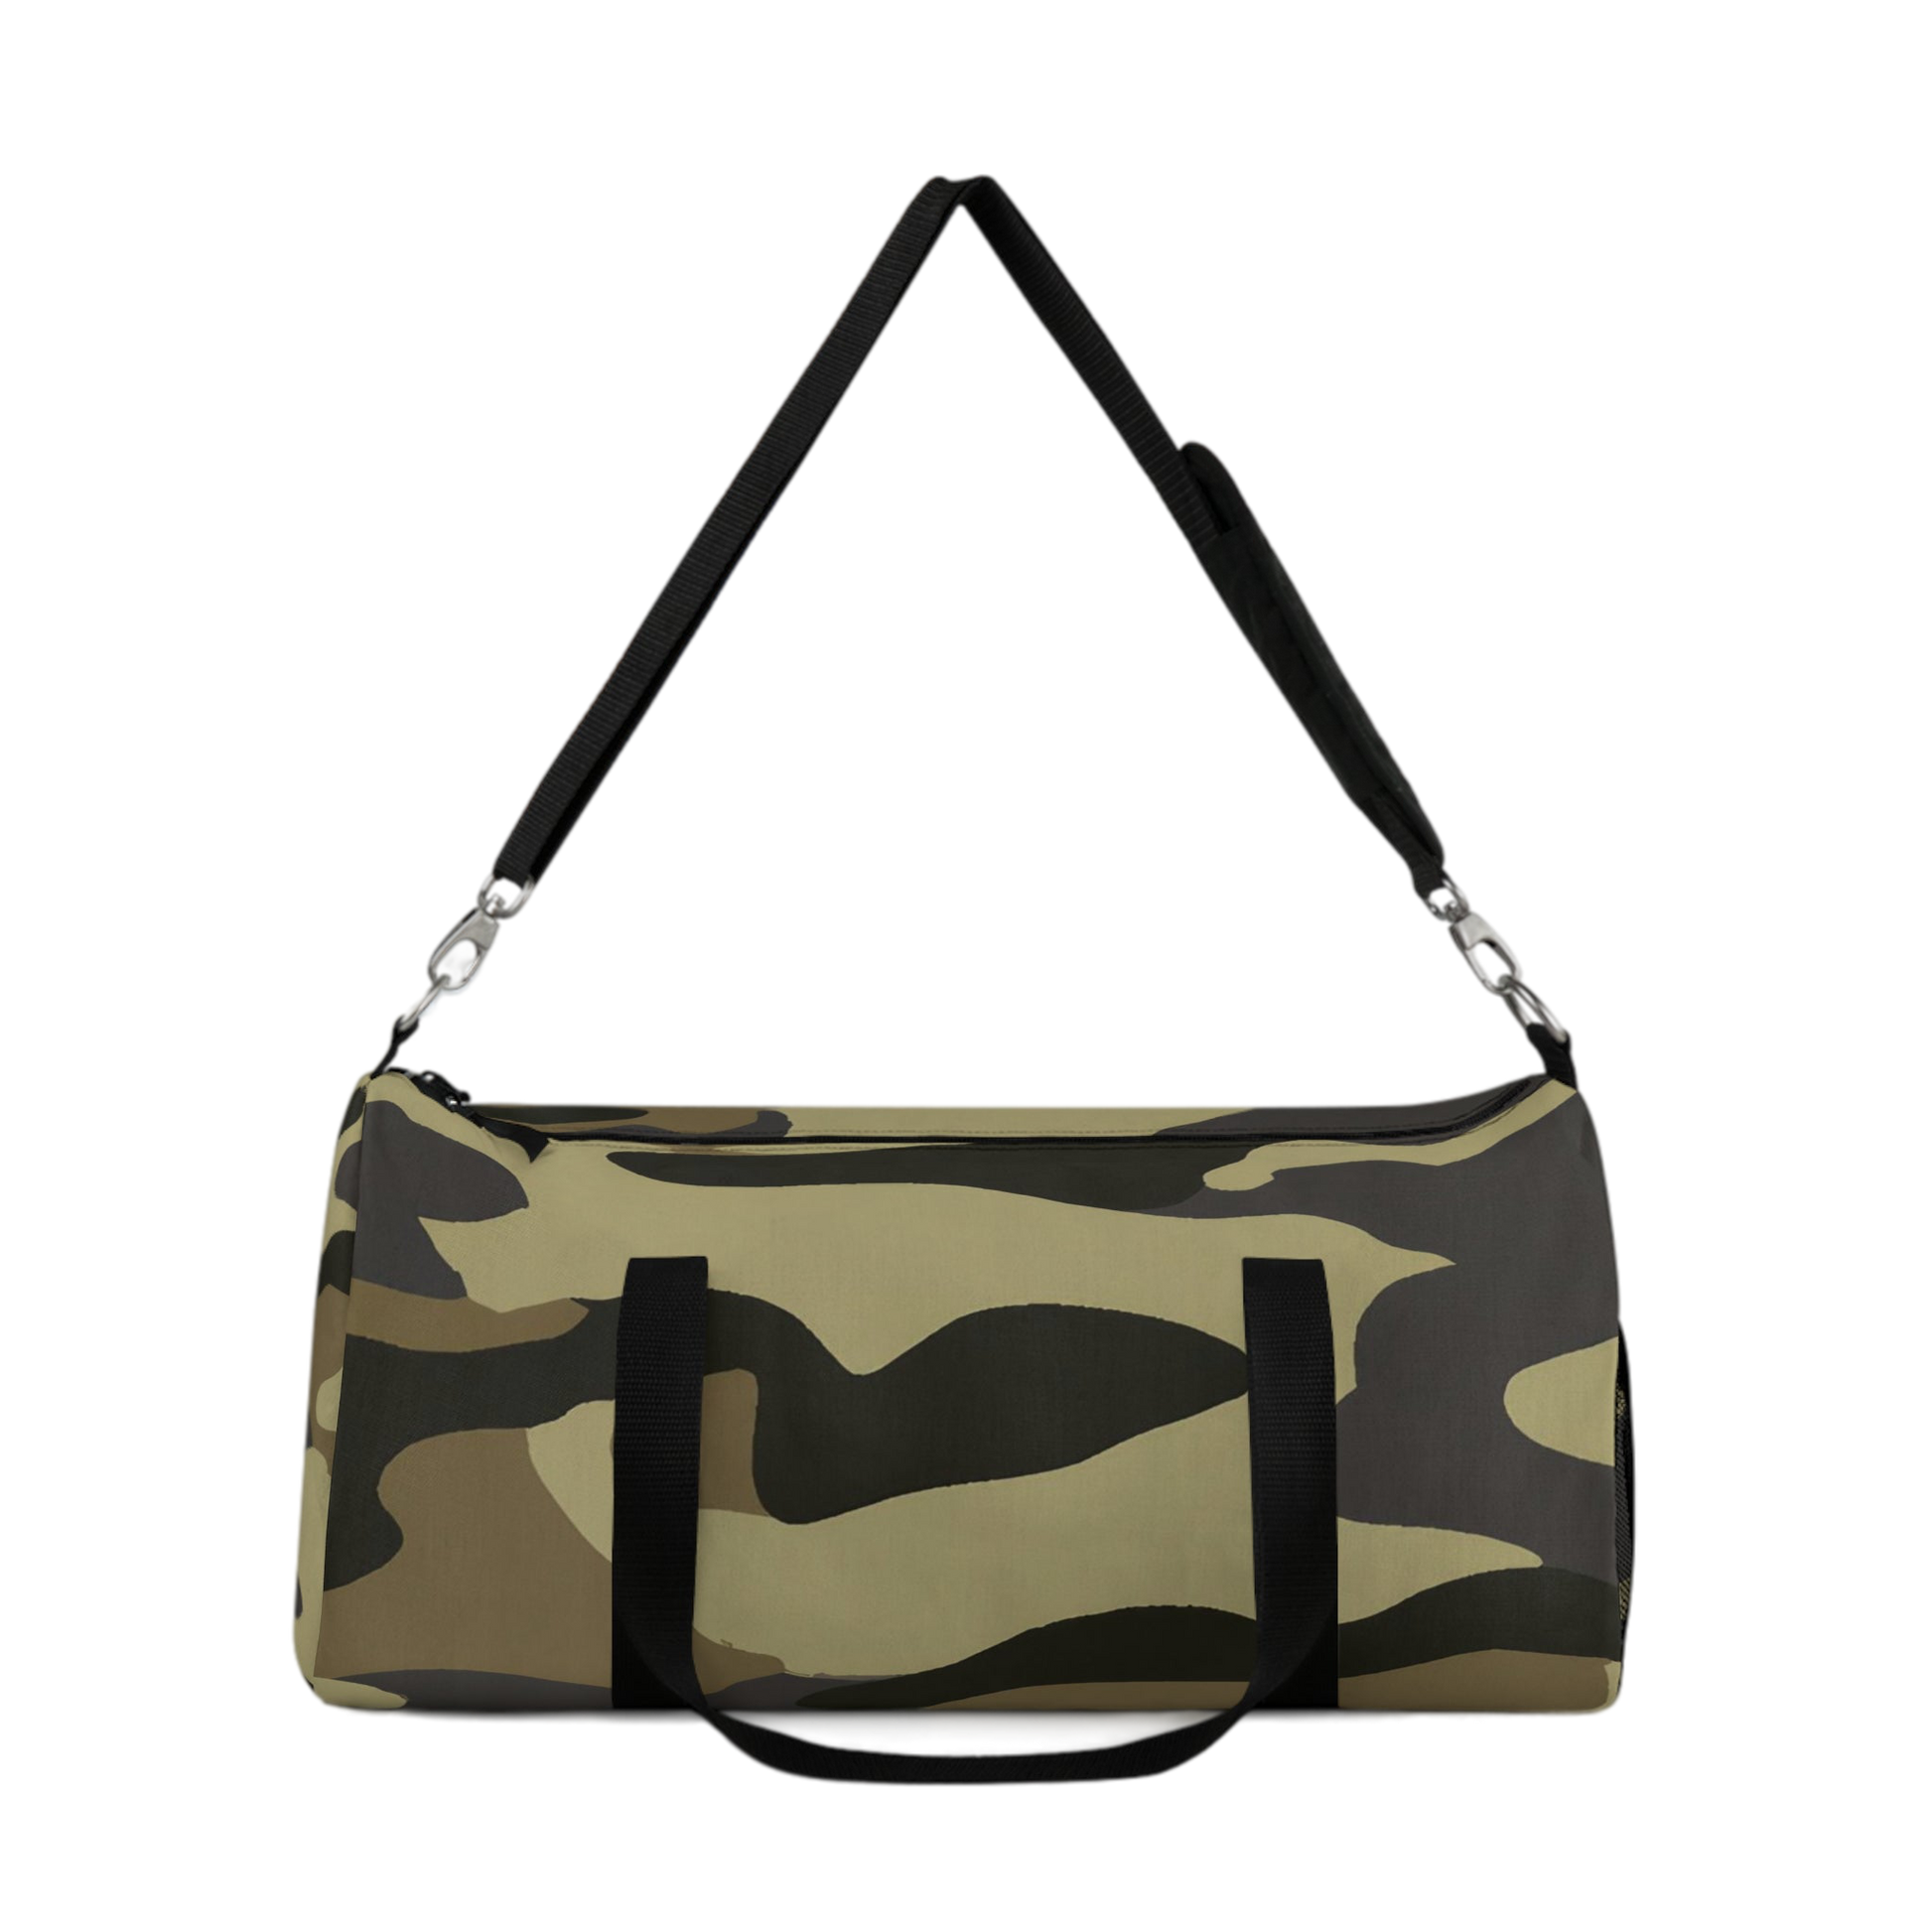 Fearless Silver Bullet - Duffle Bag - hdlm.brgnd